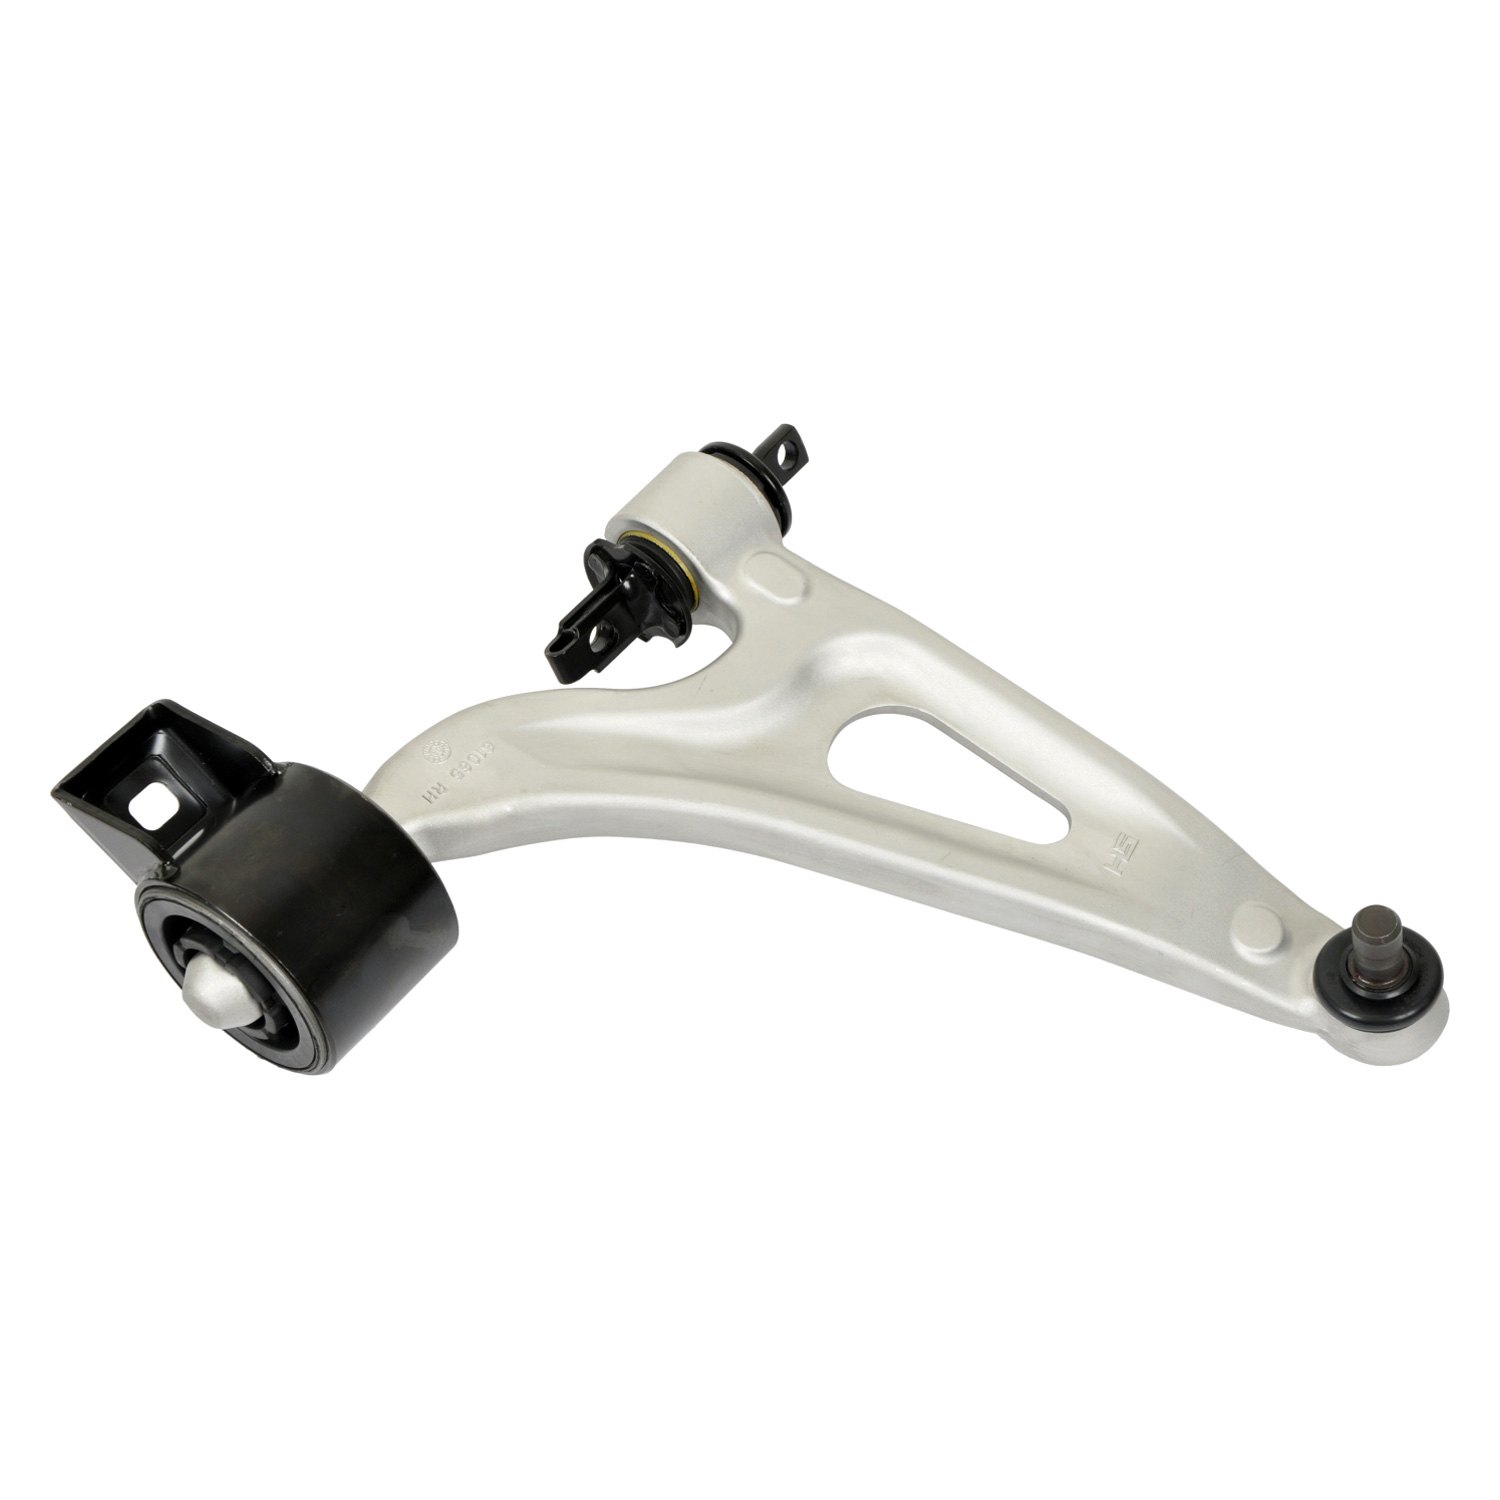 Pass Side Low Control Arm and Ball Joint Assembly Front Right Improved Bushings